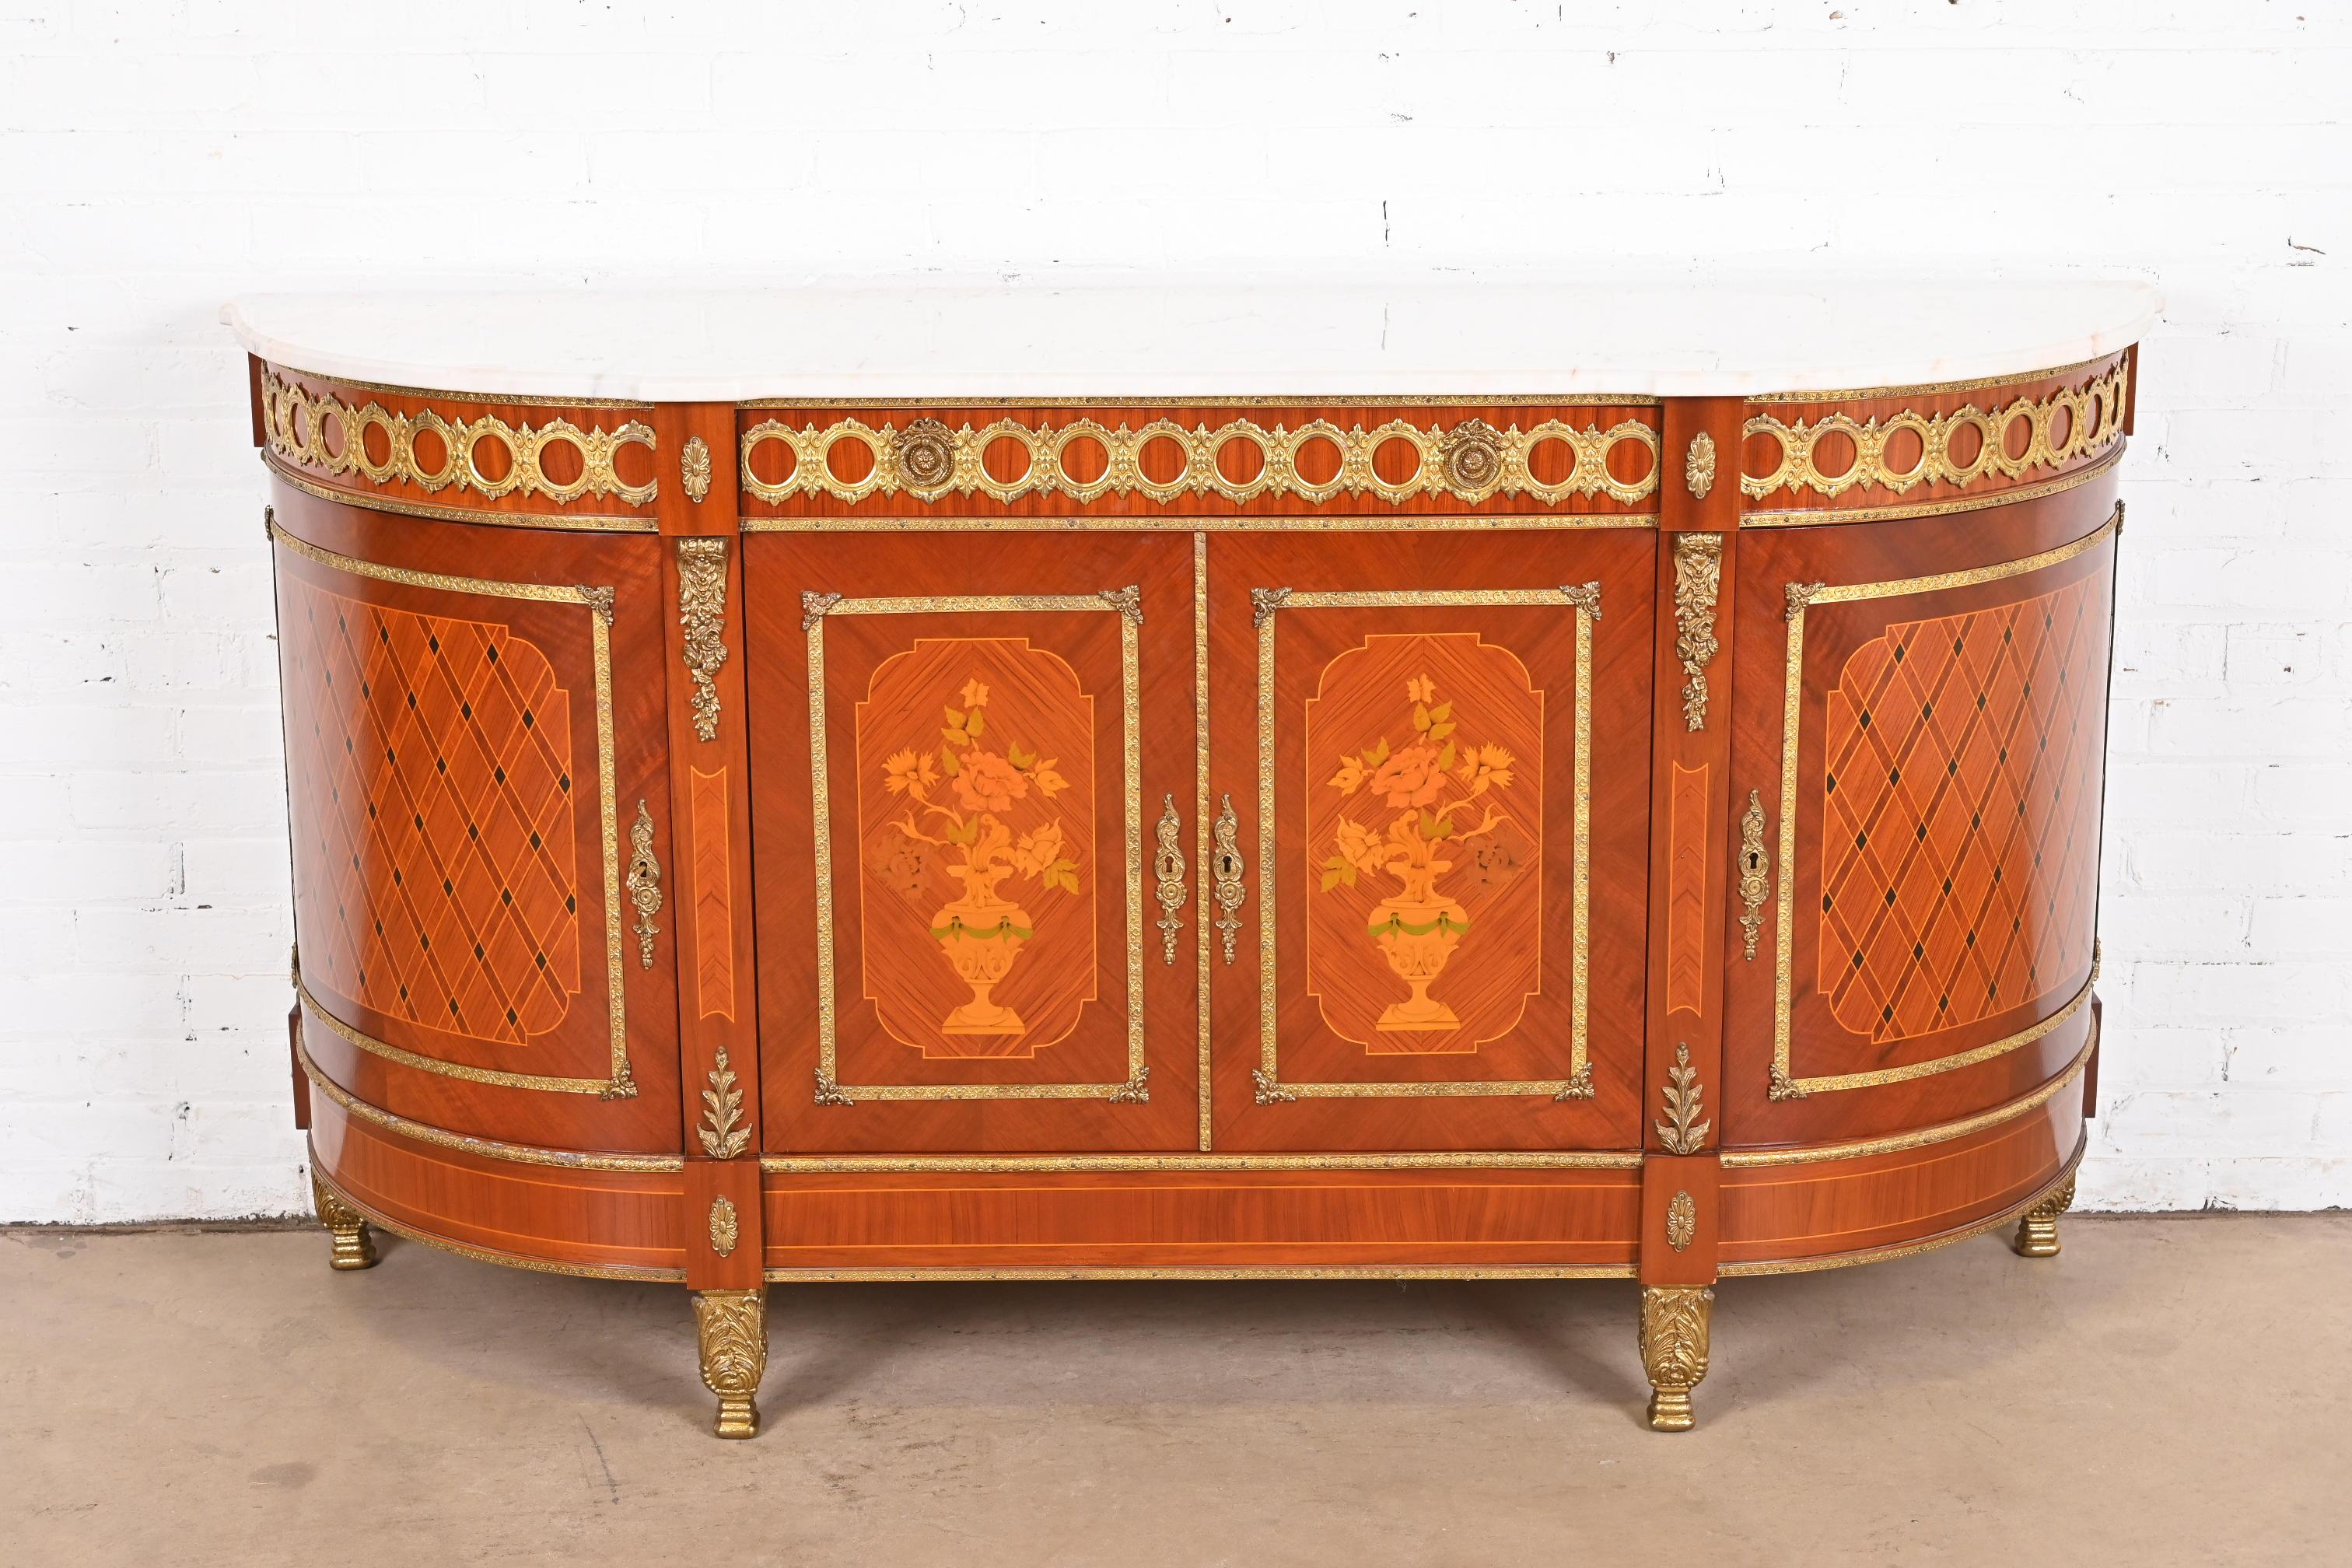 An exceptional French Regency Louis XVI or Directoire style sideboard, credenza, or bar cabinet

In the manner of N.F. Ameublement

France, Circa Mid-20th century

Kingwood, with inlaid satinwood marquetry and parquetry, bronze ormolu mounts, and